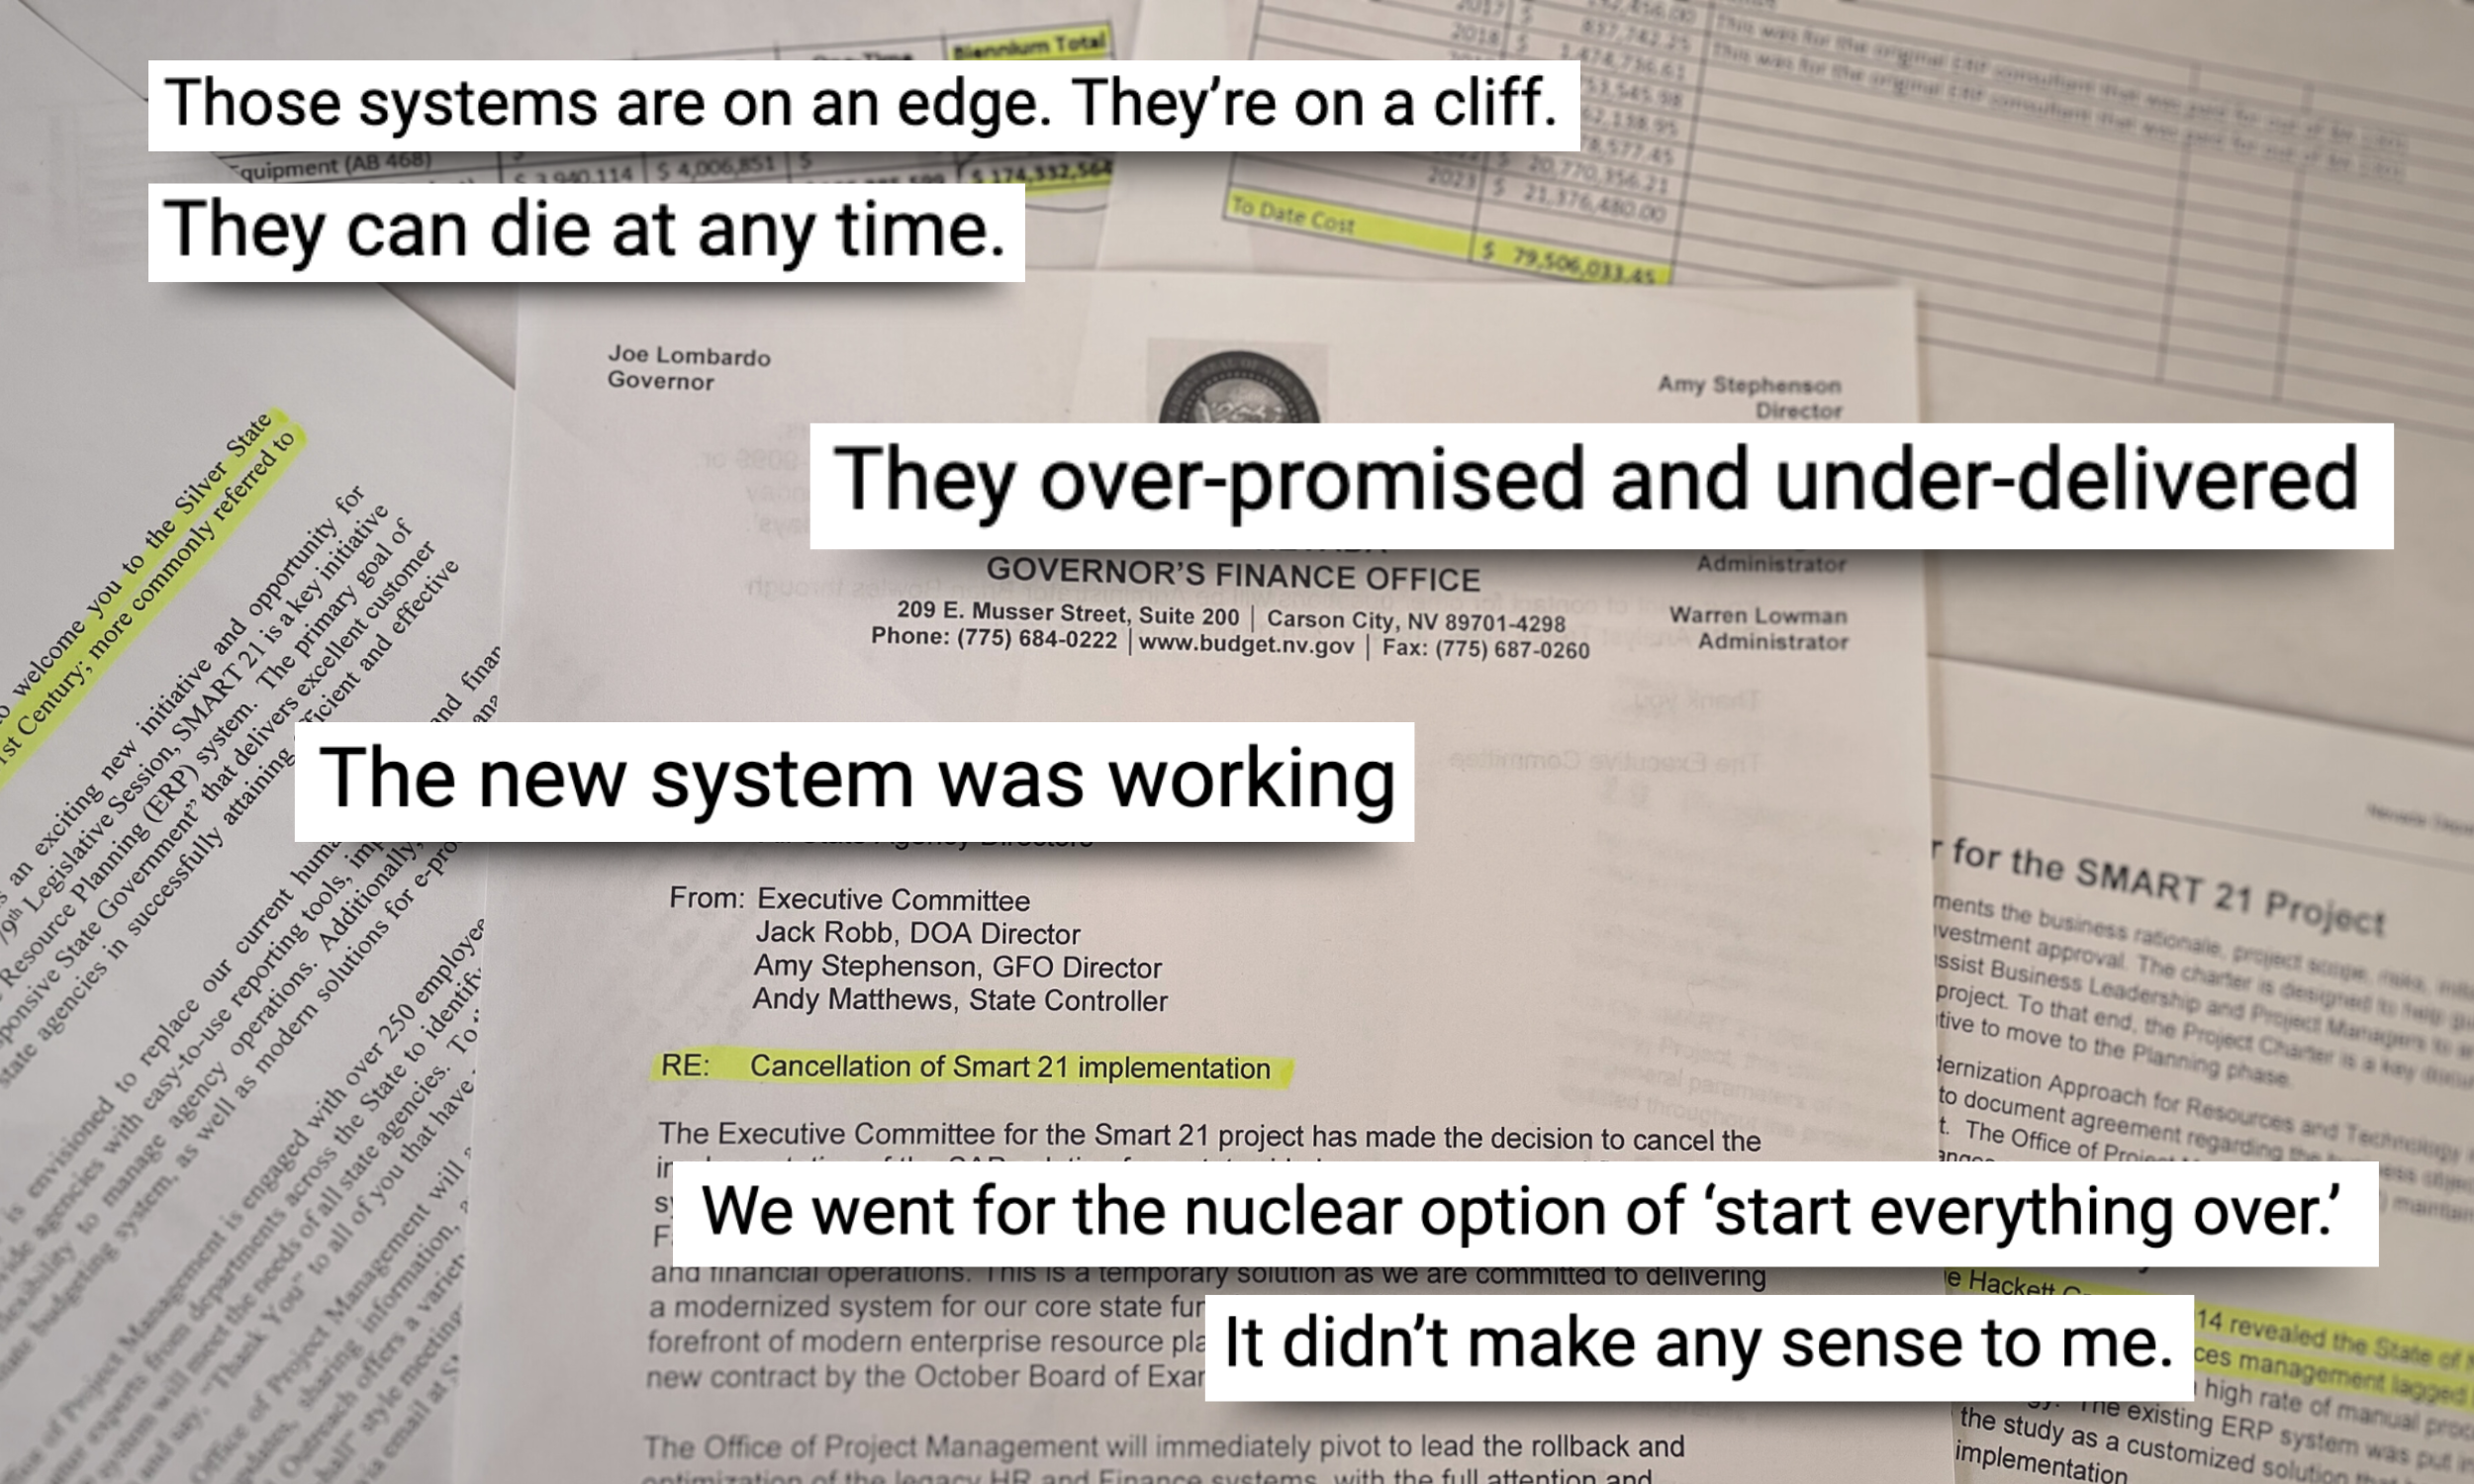 Quotes that read: "Those systems are on an edge. They're on a cliff. They can die at any time." "They over-promised and under-delivered" "The new systems was working" "We went for the nuclear option of 'start everything over.' It didn't make any sense to me."